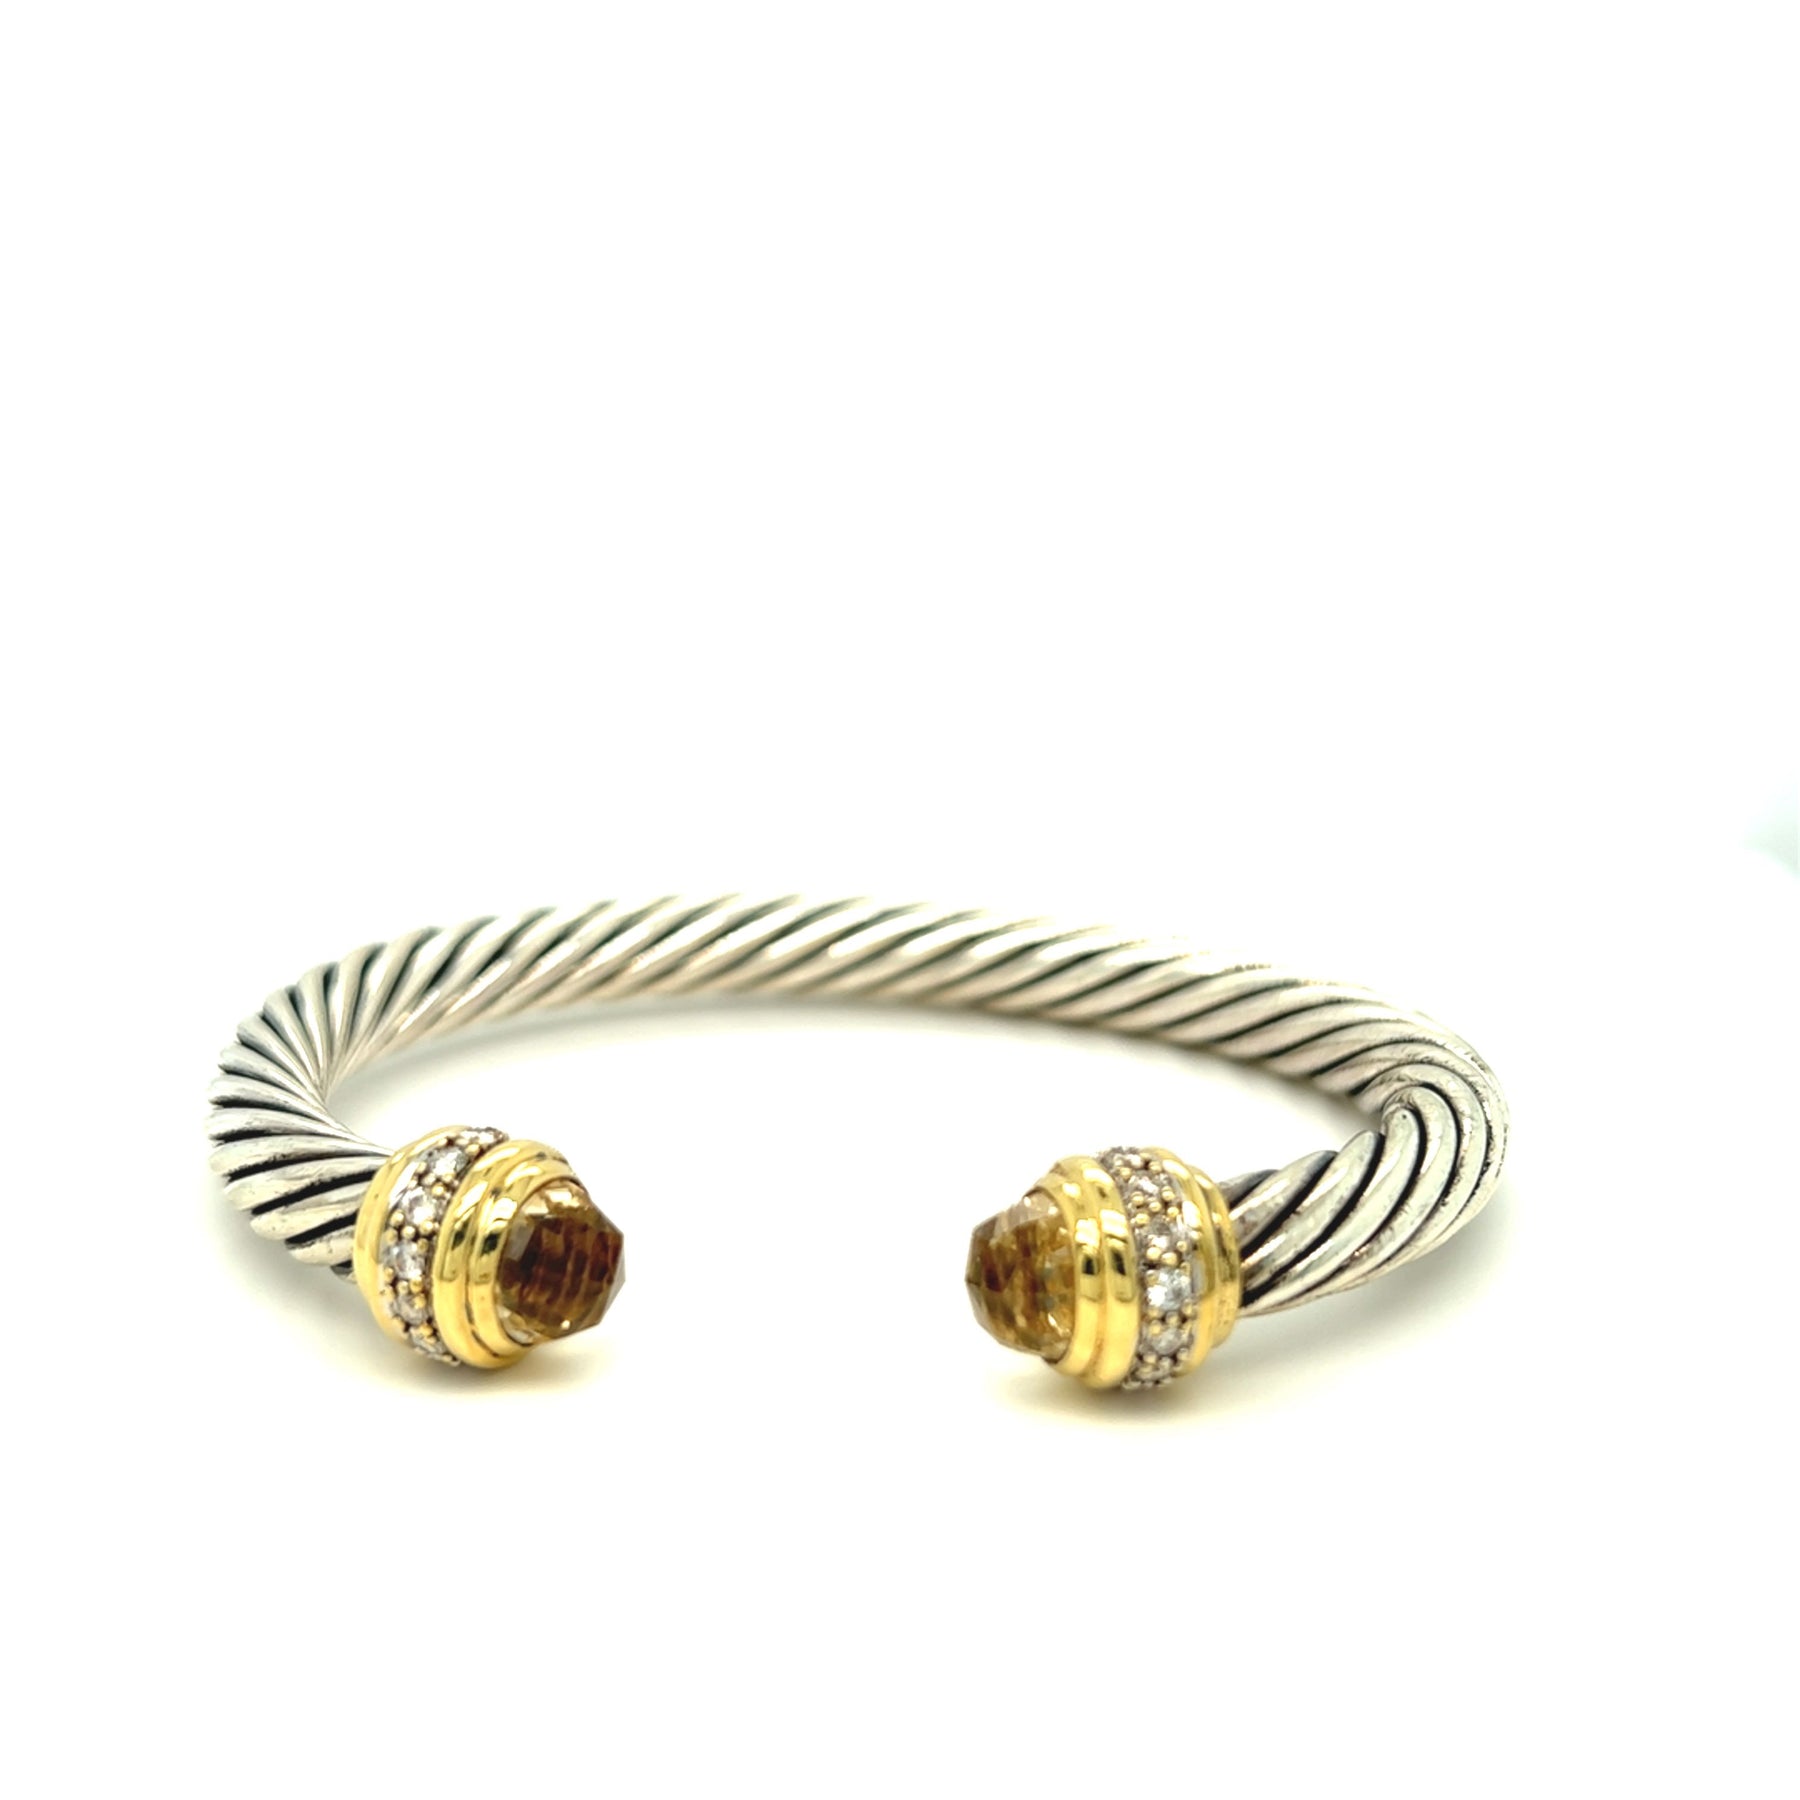 Bangle Cable Diamond Gems and Citrine Are Silver David Yurman – and Cuff Bracelet Forever